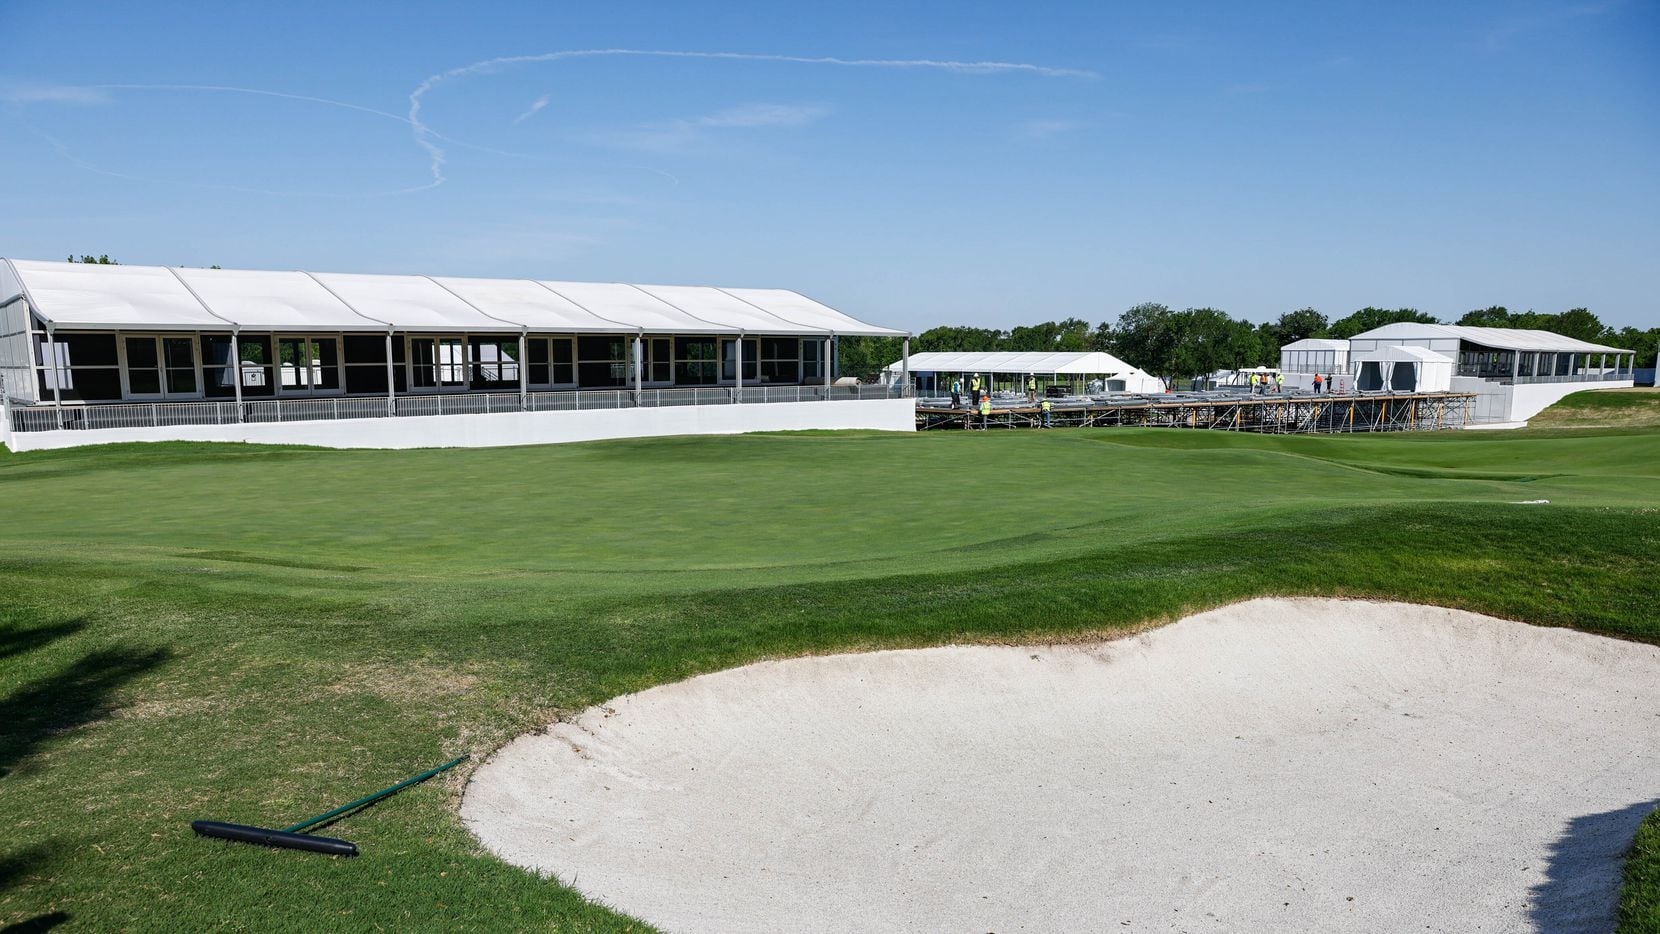 Hospitality venues on Hole 17 in process of expansion to create an exciting stadium-like...